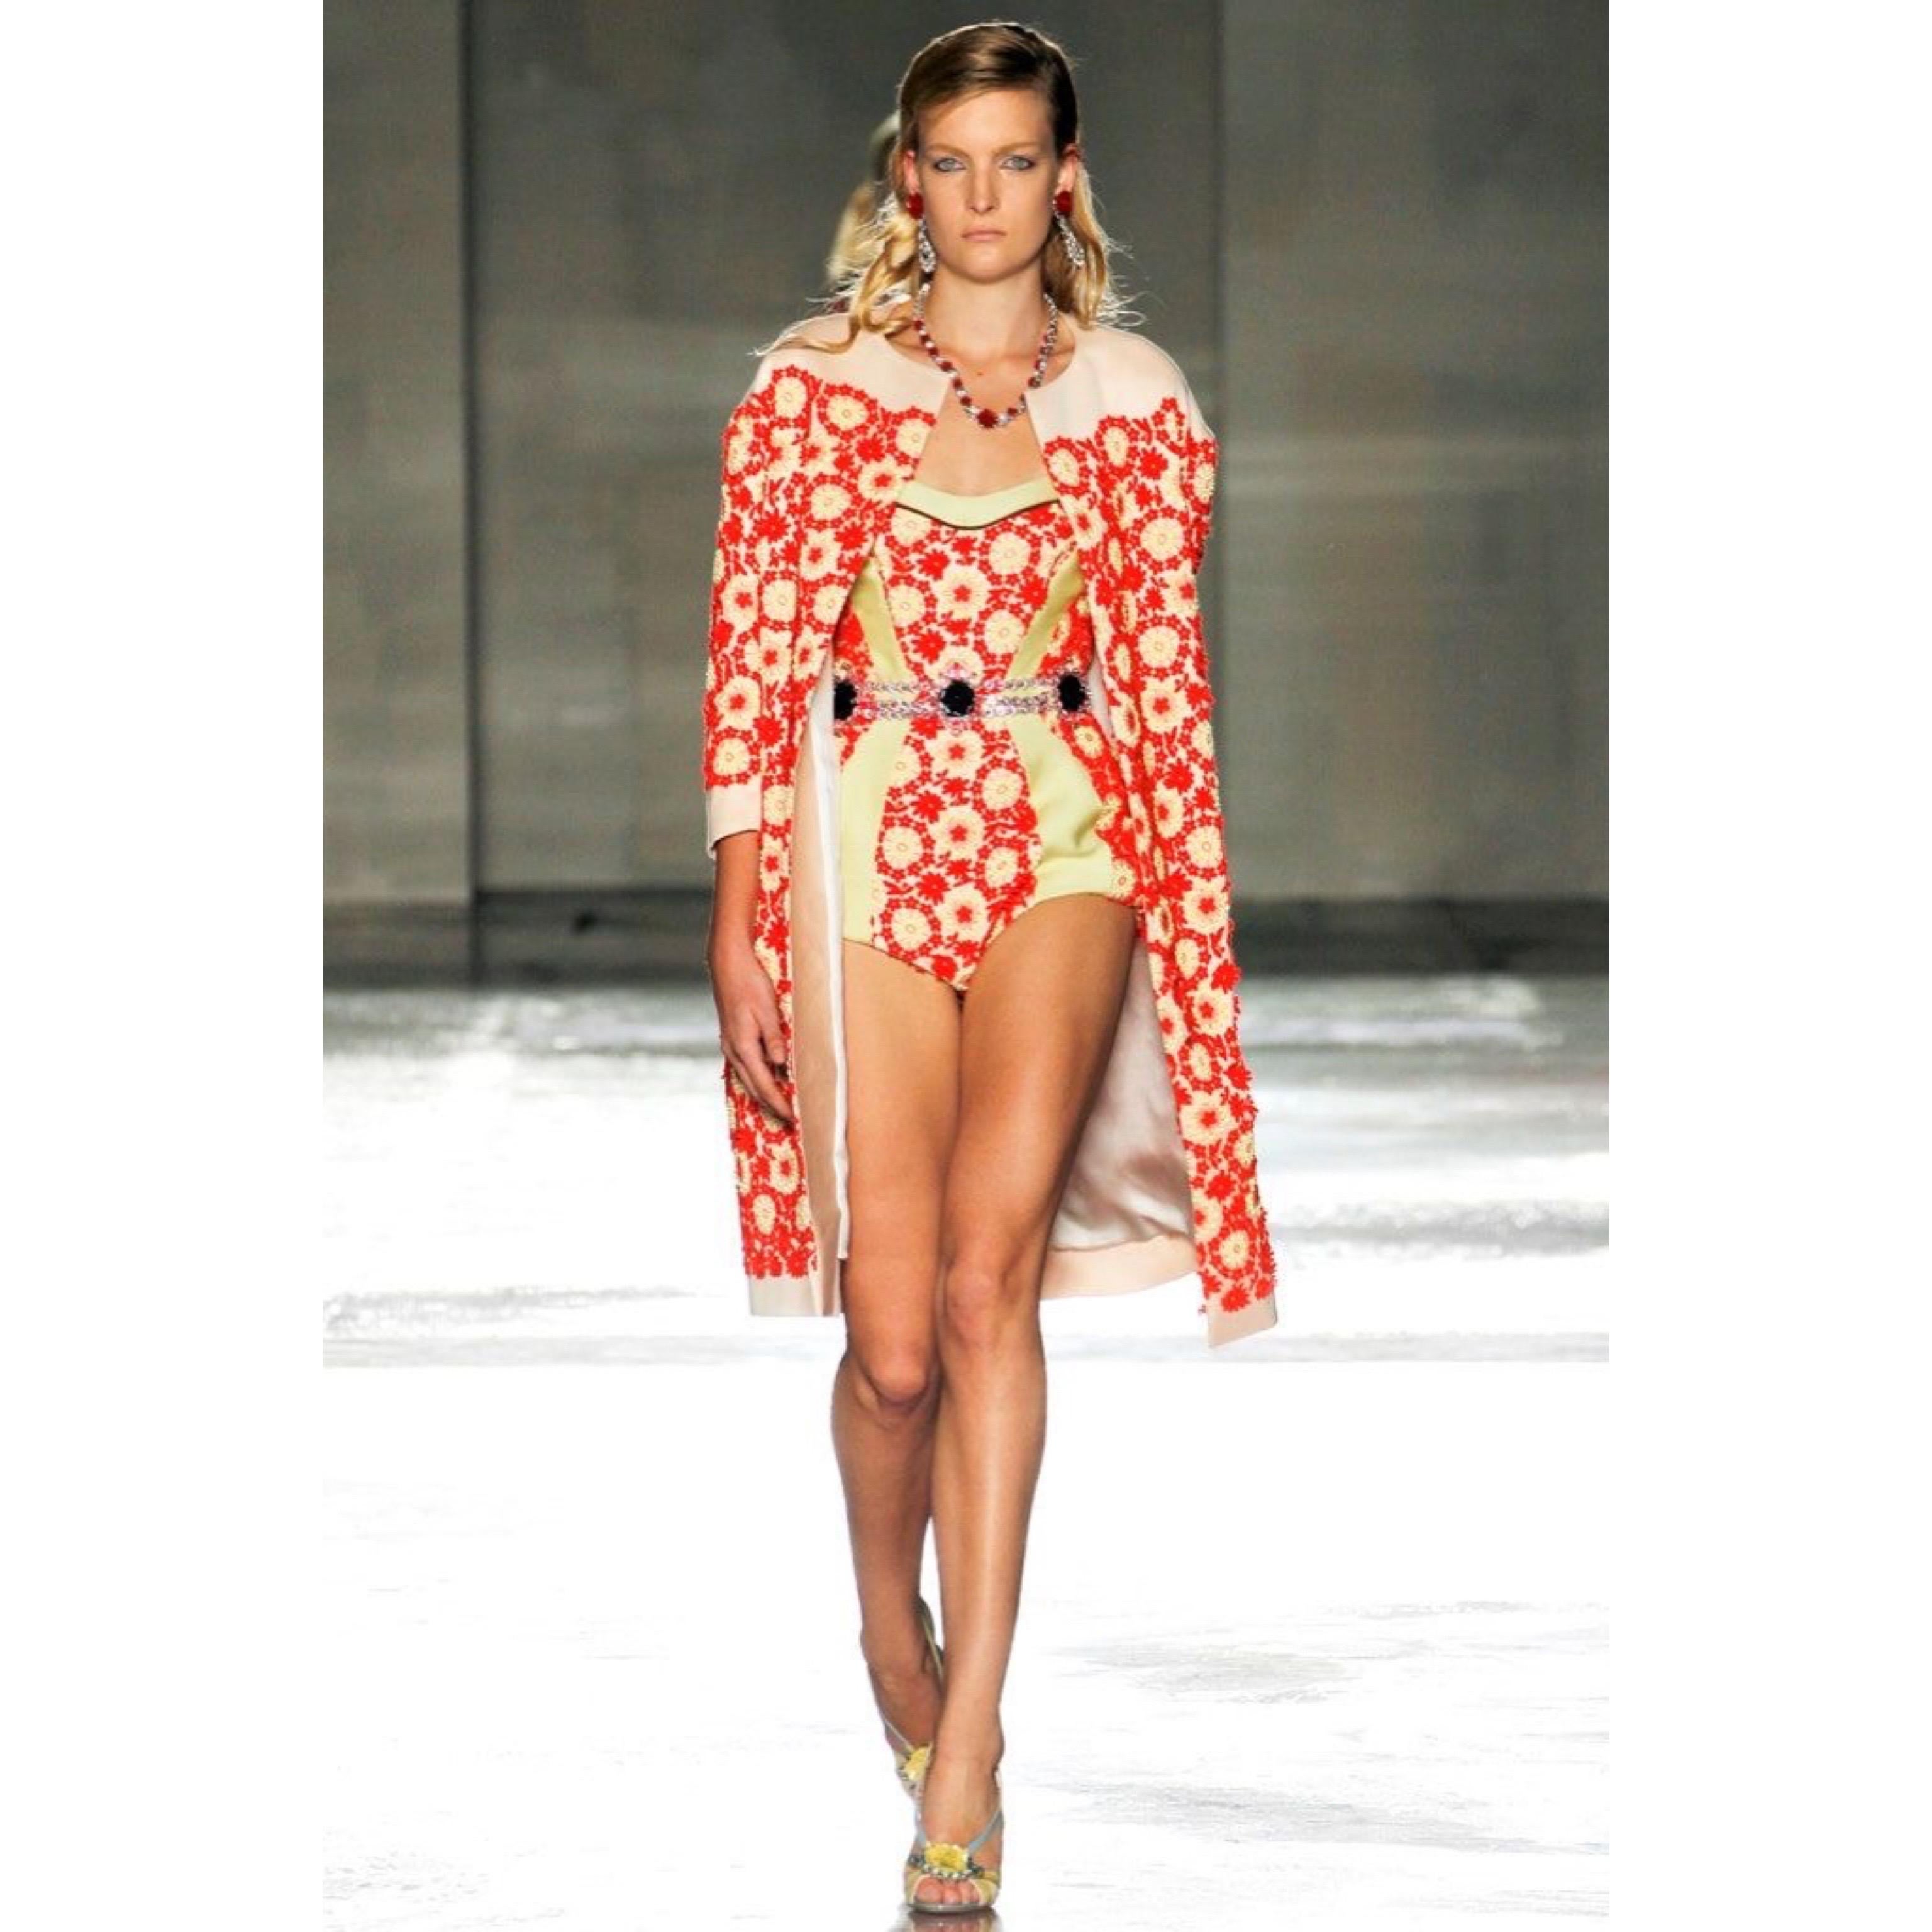 Prada Most Wanted Spring 2012 Floral Embroidered Pinup Bodysuit For Sale 9